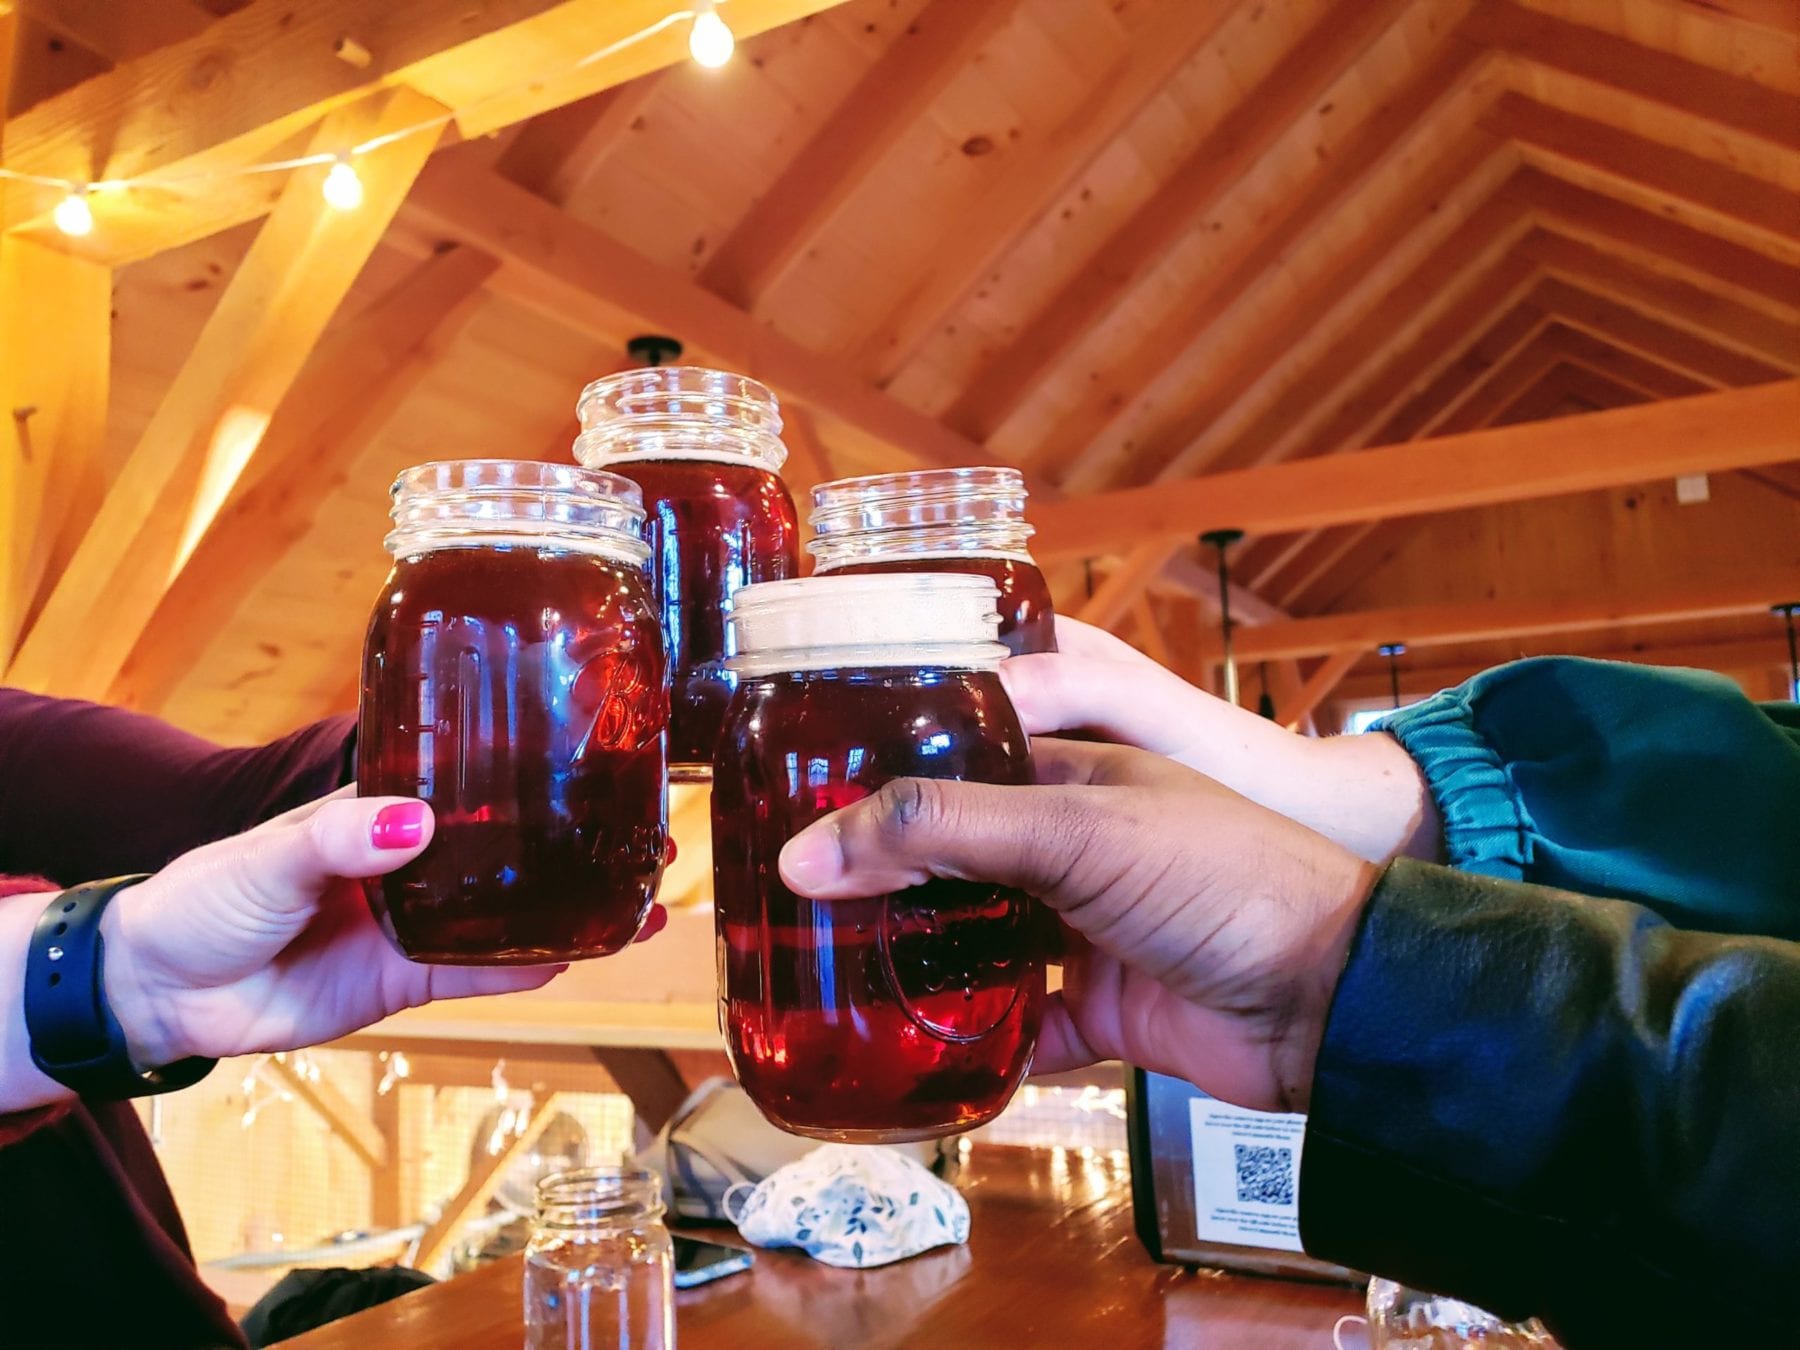 Our Top 5 favorite outdoor Craft Breweries